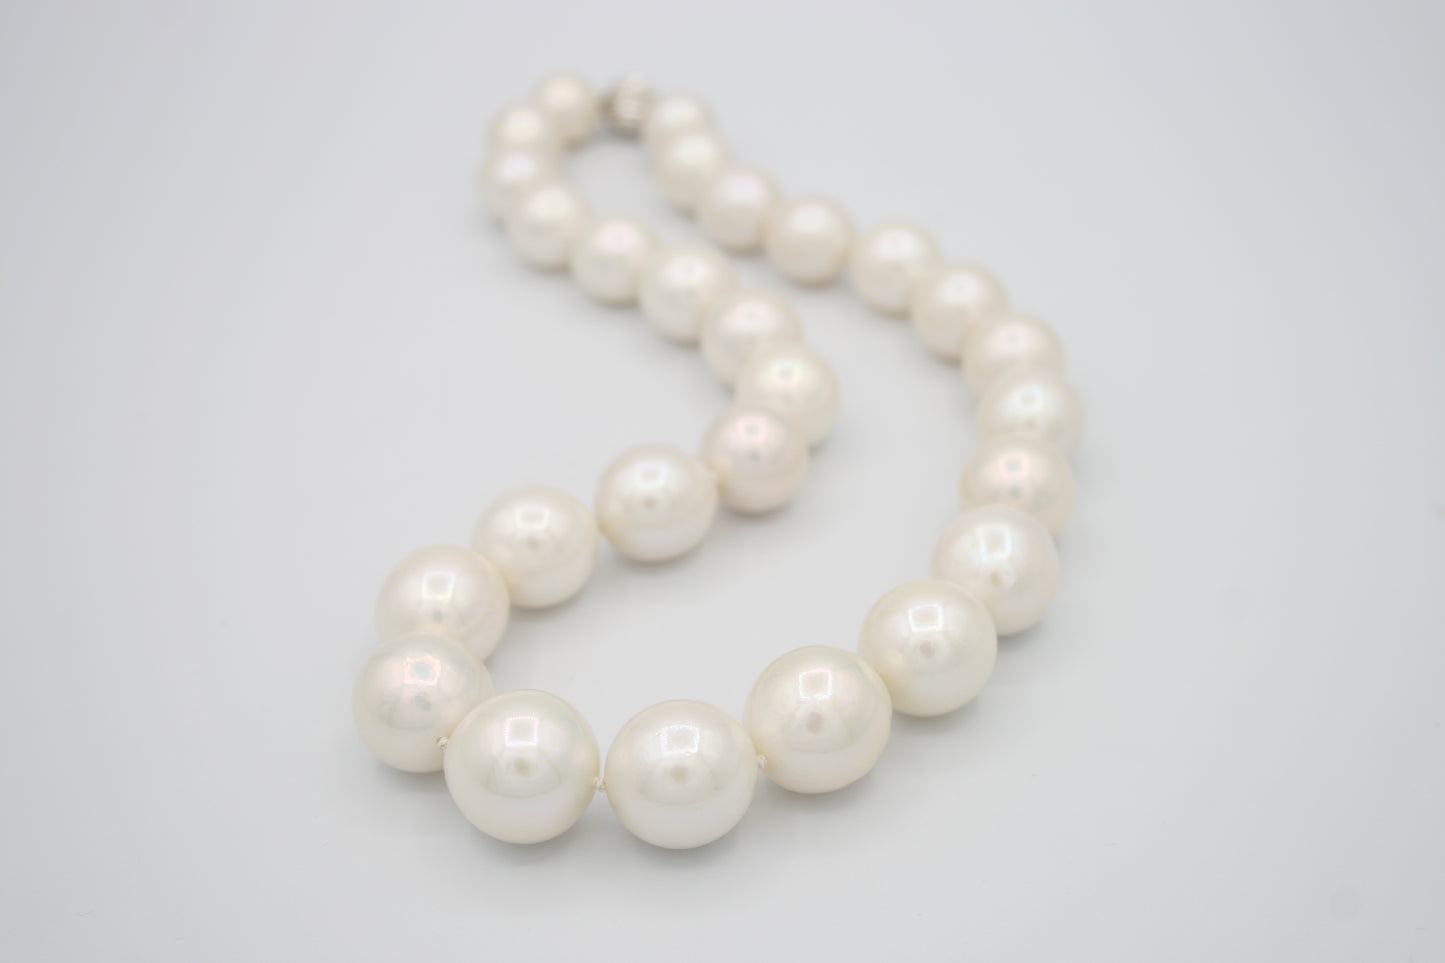 XXL Freshwater Pearl Necklace